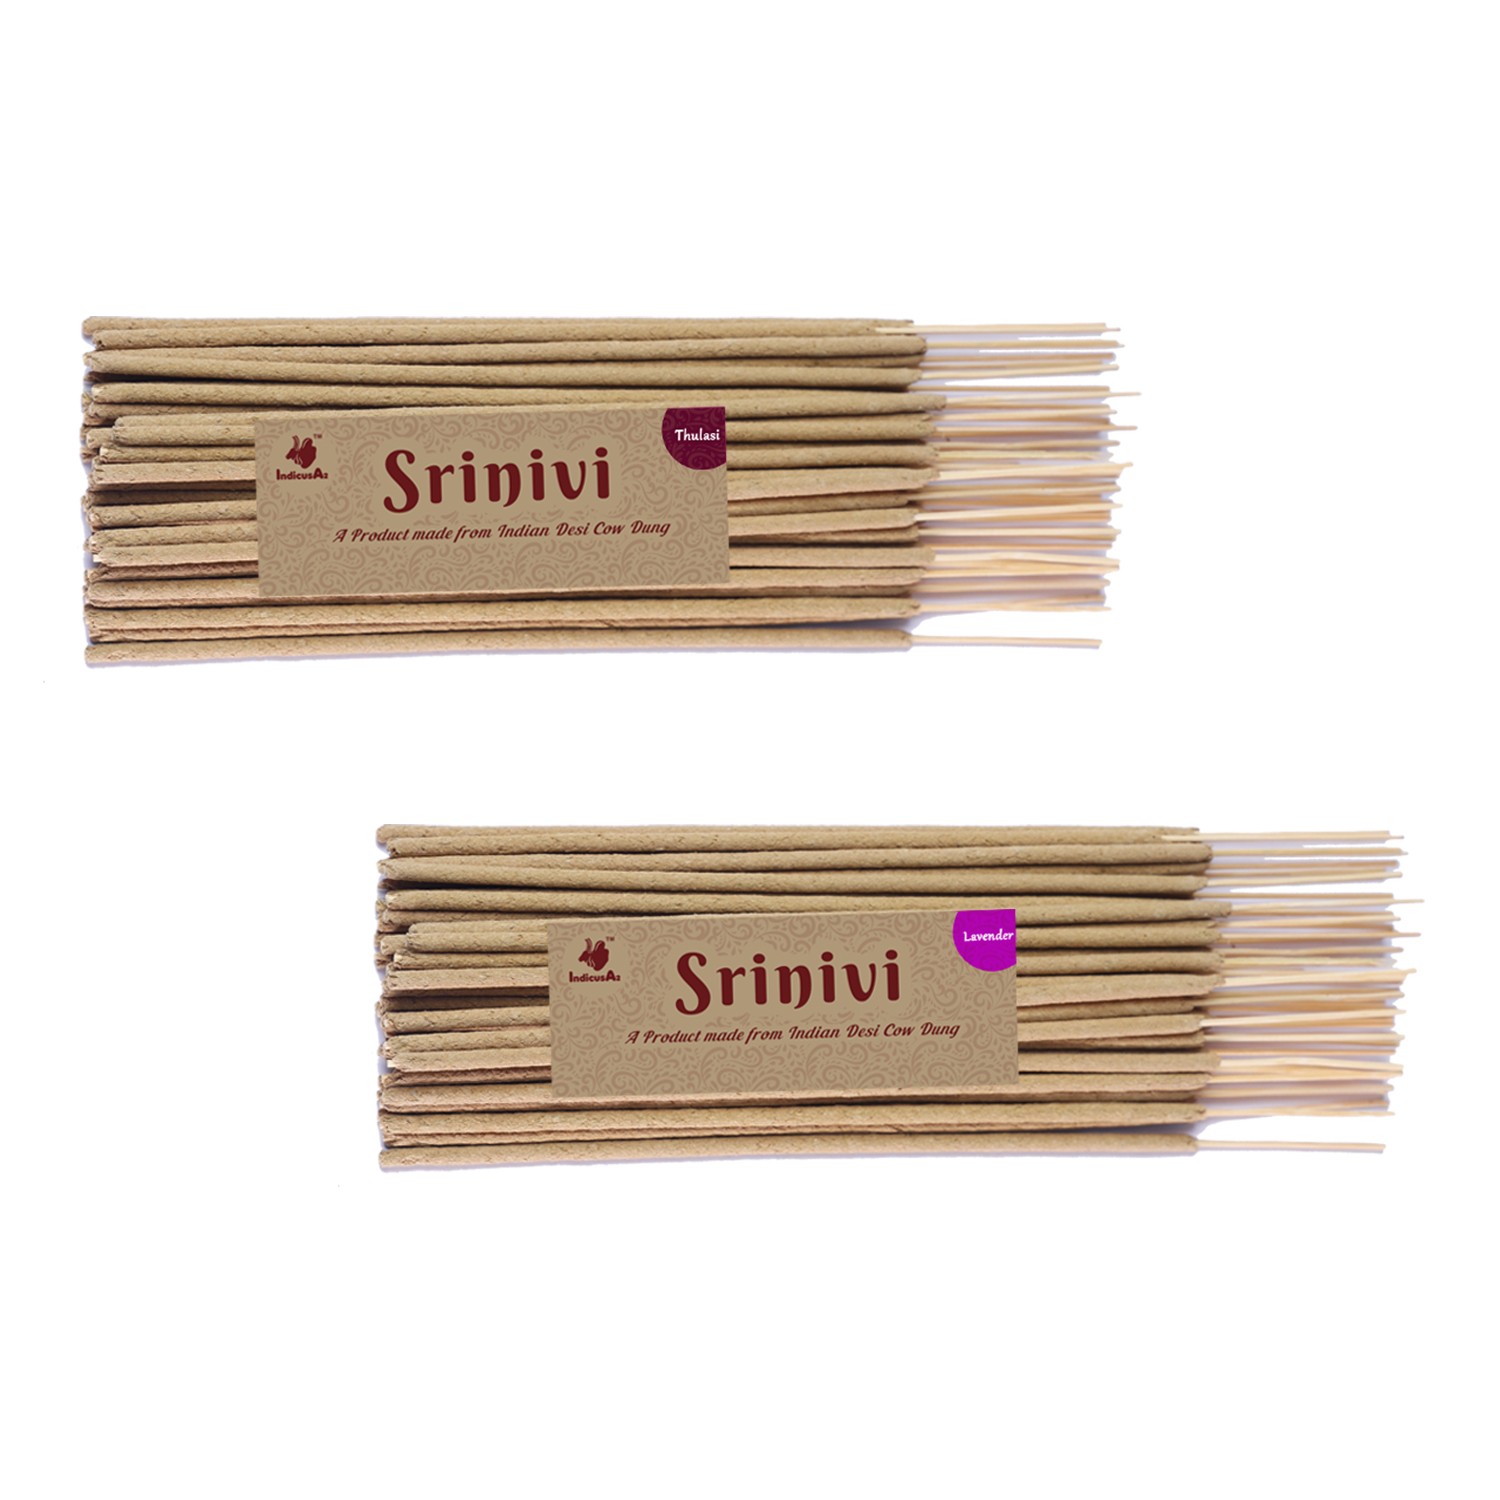 Srinivi Agarbattis - Made up of desi cow dung|Pack of 2|Each pack consists of 35 sticks|Fragrance – Thulasi, Lavender.